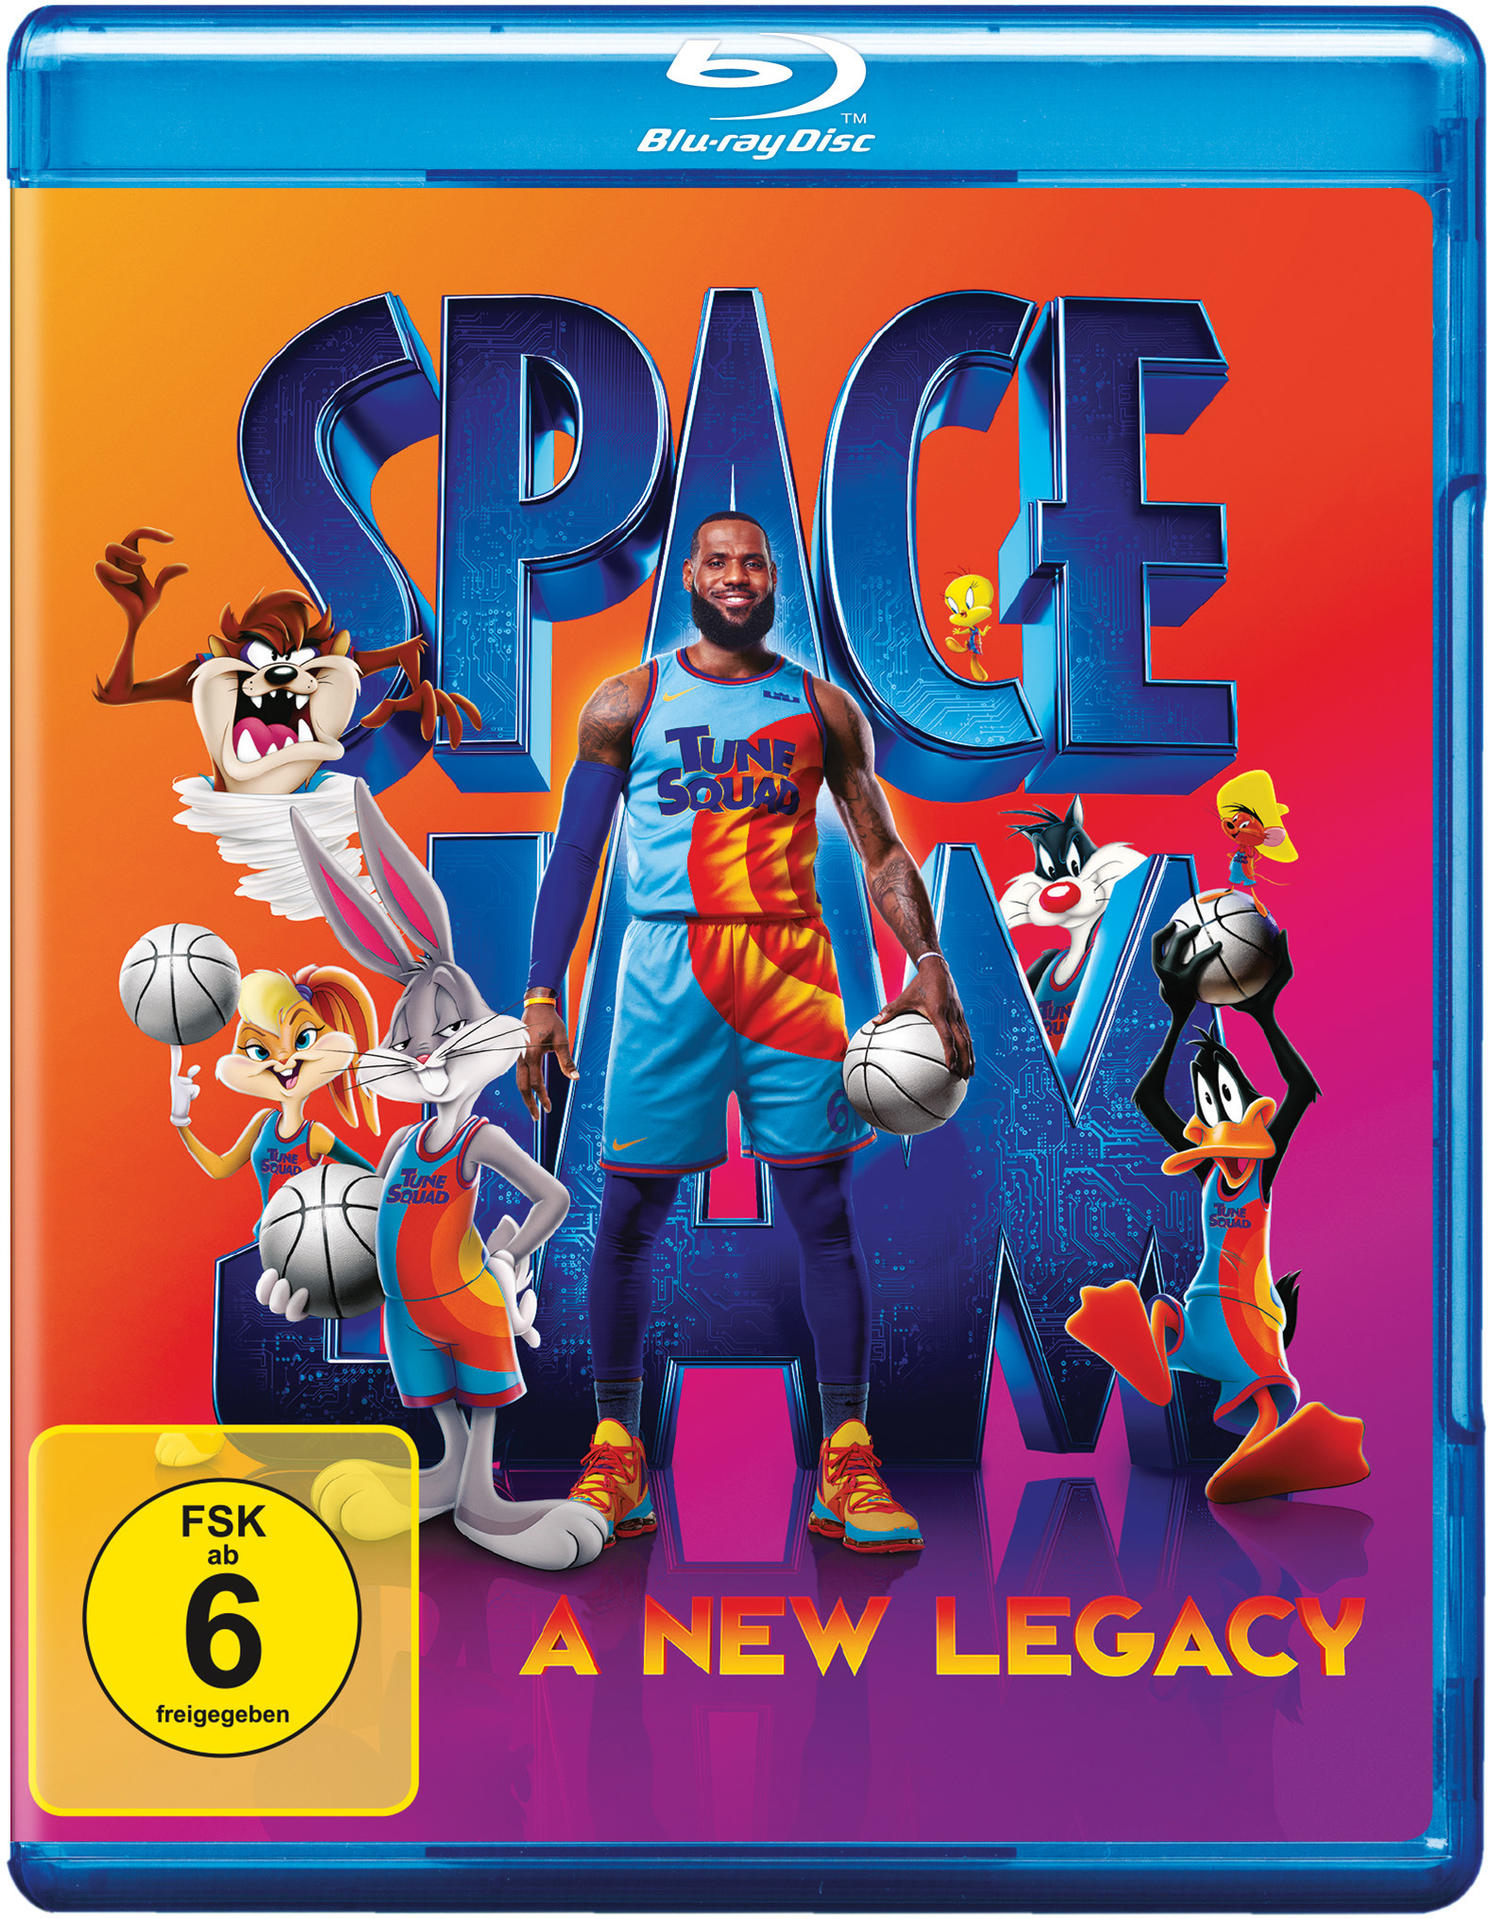 Space Jam: A New Legacy Blu-ray